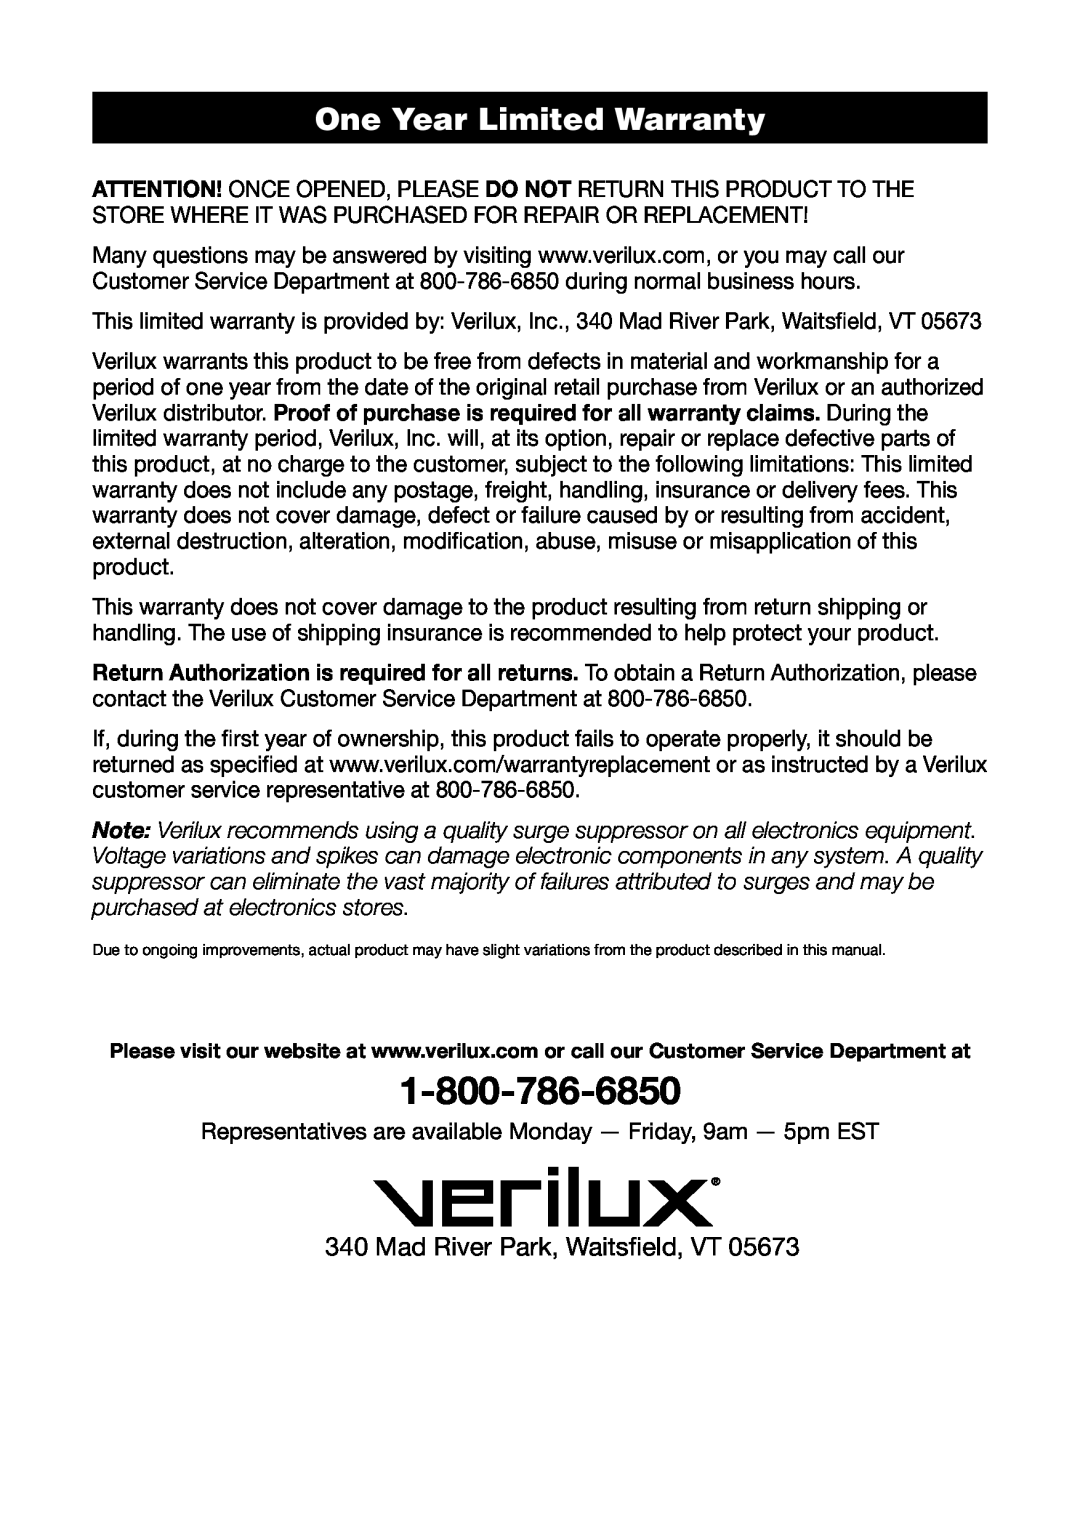 Verilux VF02 manual One Year Limited Warranty, Mad River Park, Waitsfield, VT 